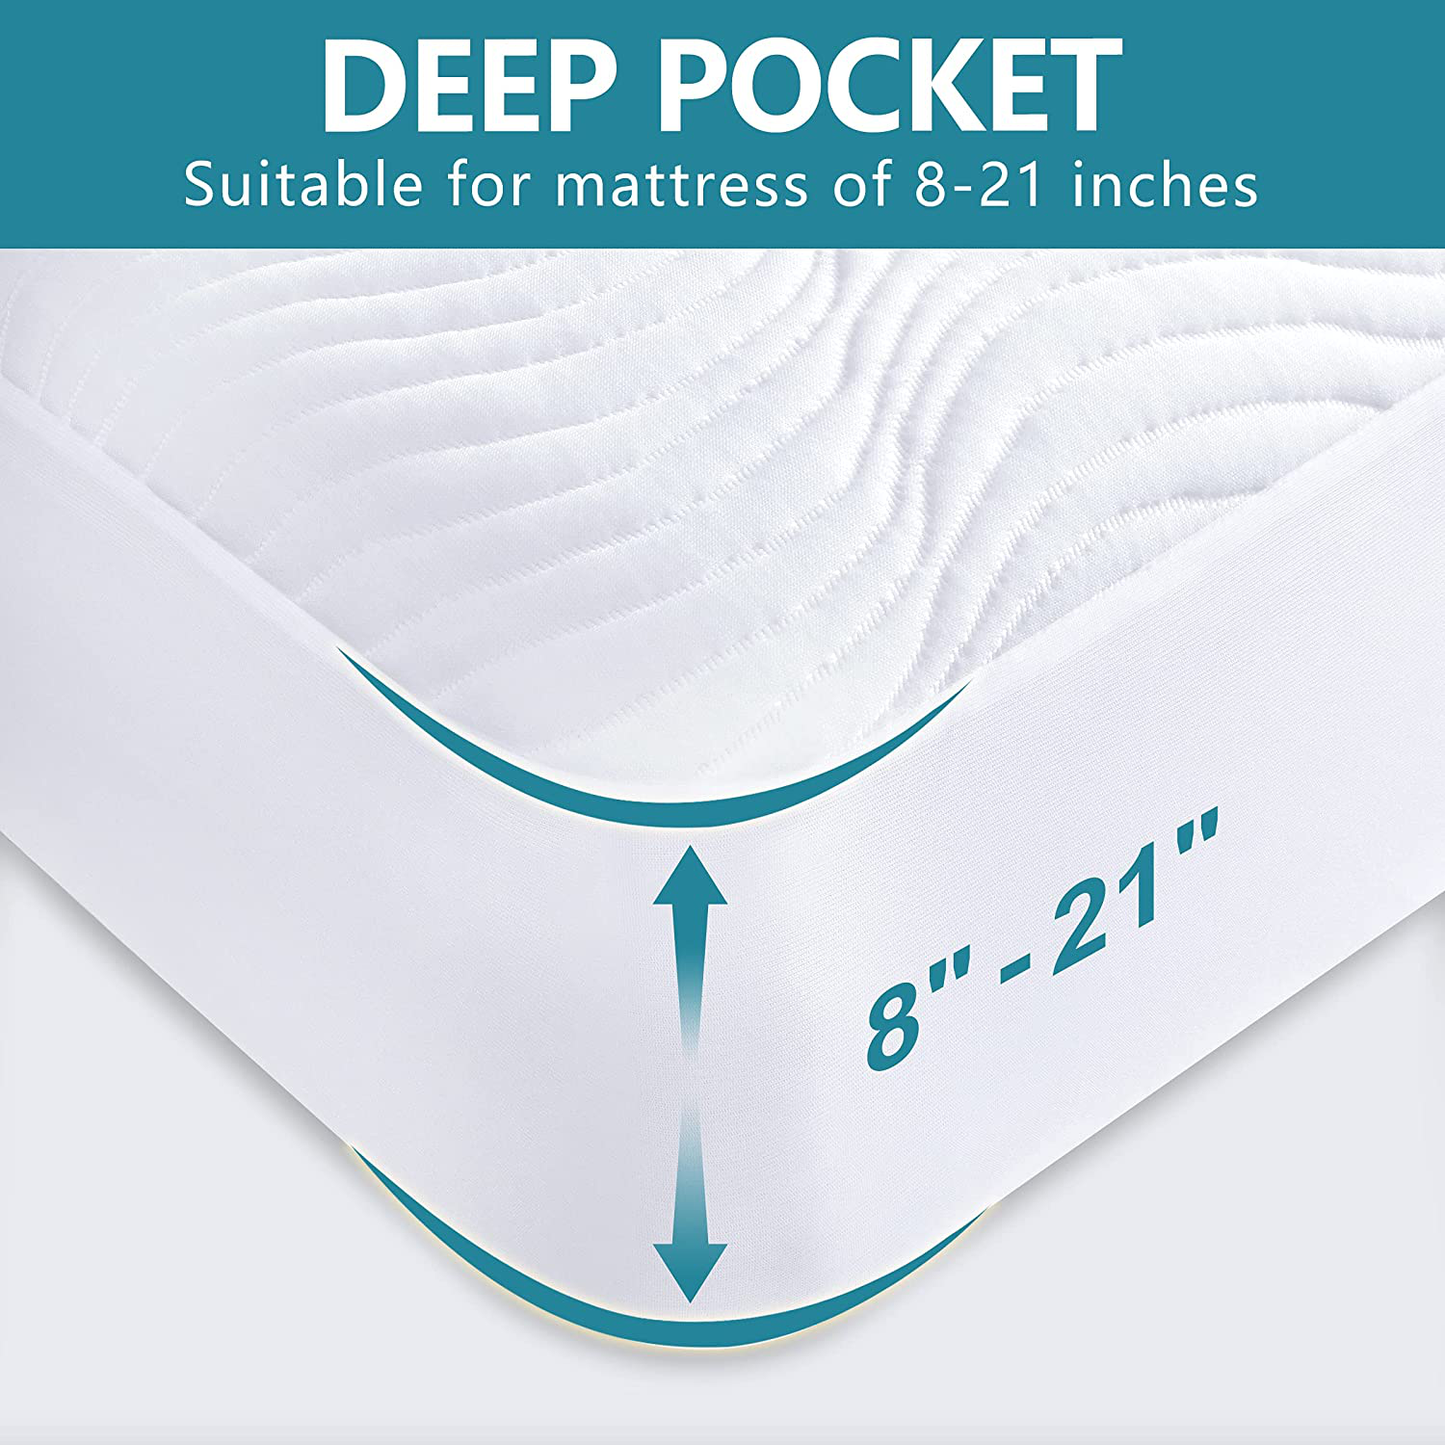 SINSAY Twin Size Waterproof Mattress Protector, Breathable Ultra-Soft & Noiseless Protector Cover, Stretchable Deep Pocket Fits Up to 21" Mattress Pad, Easy to Clean Machine-Wash Mattress Cover